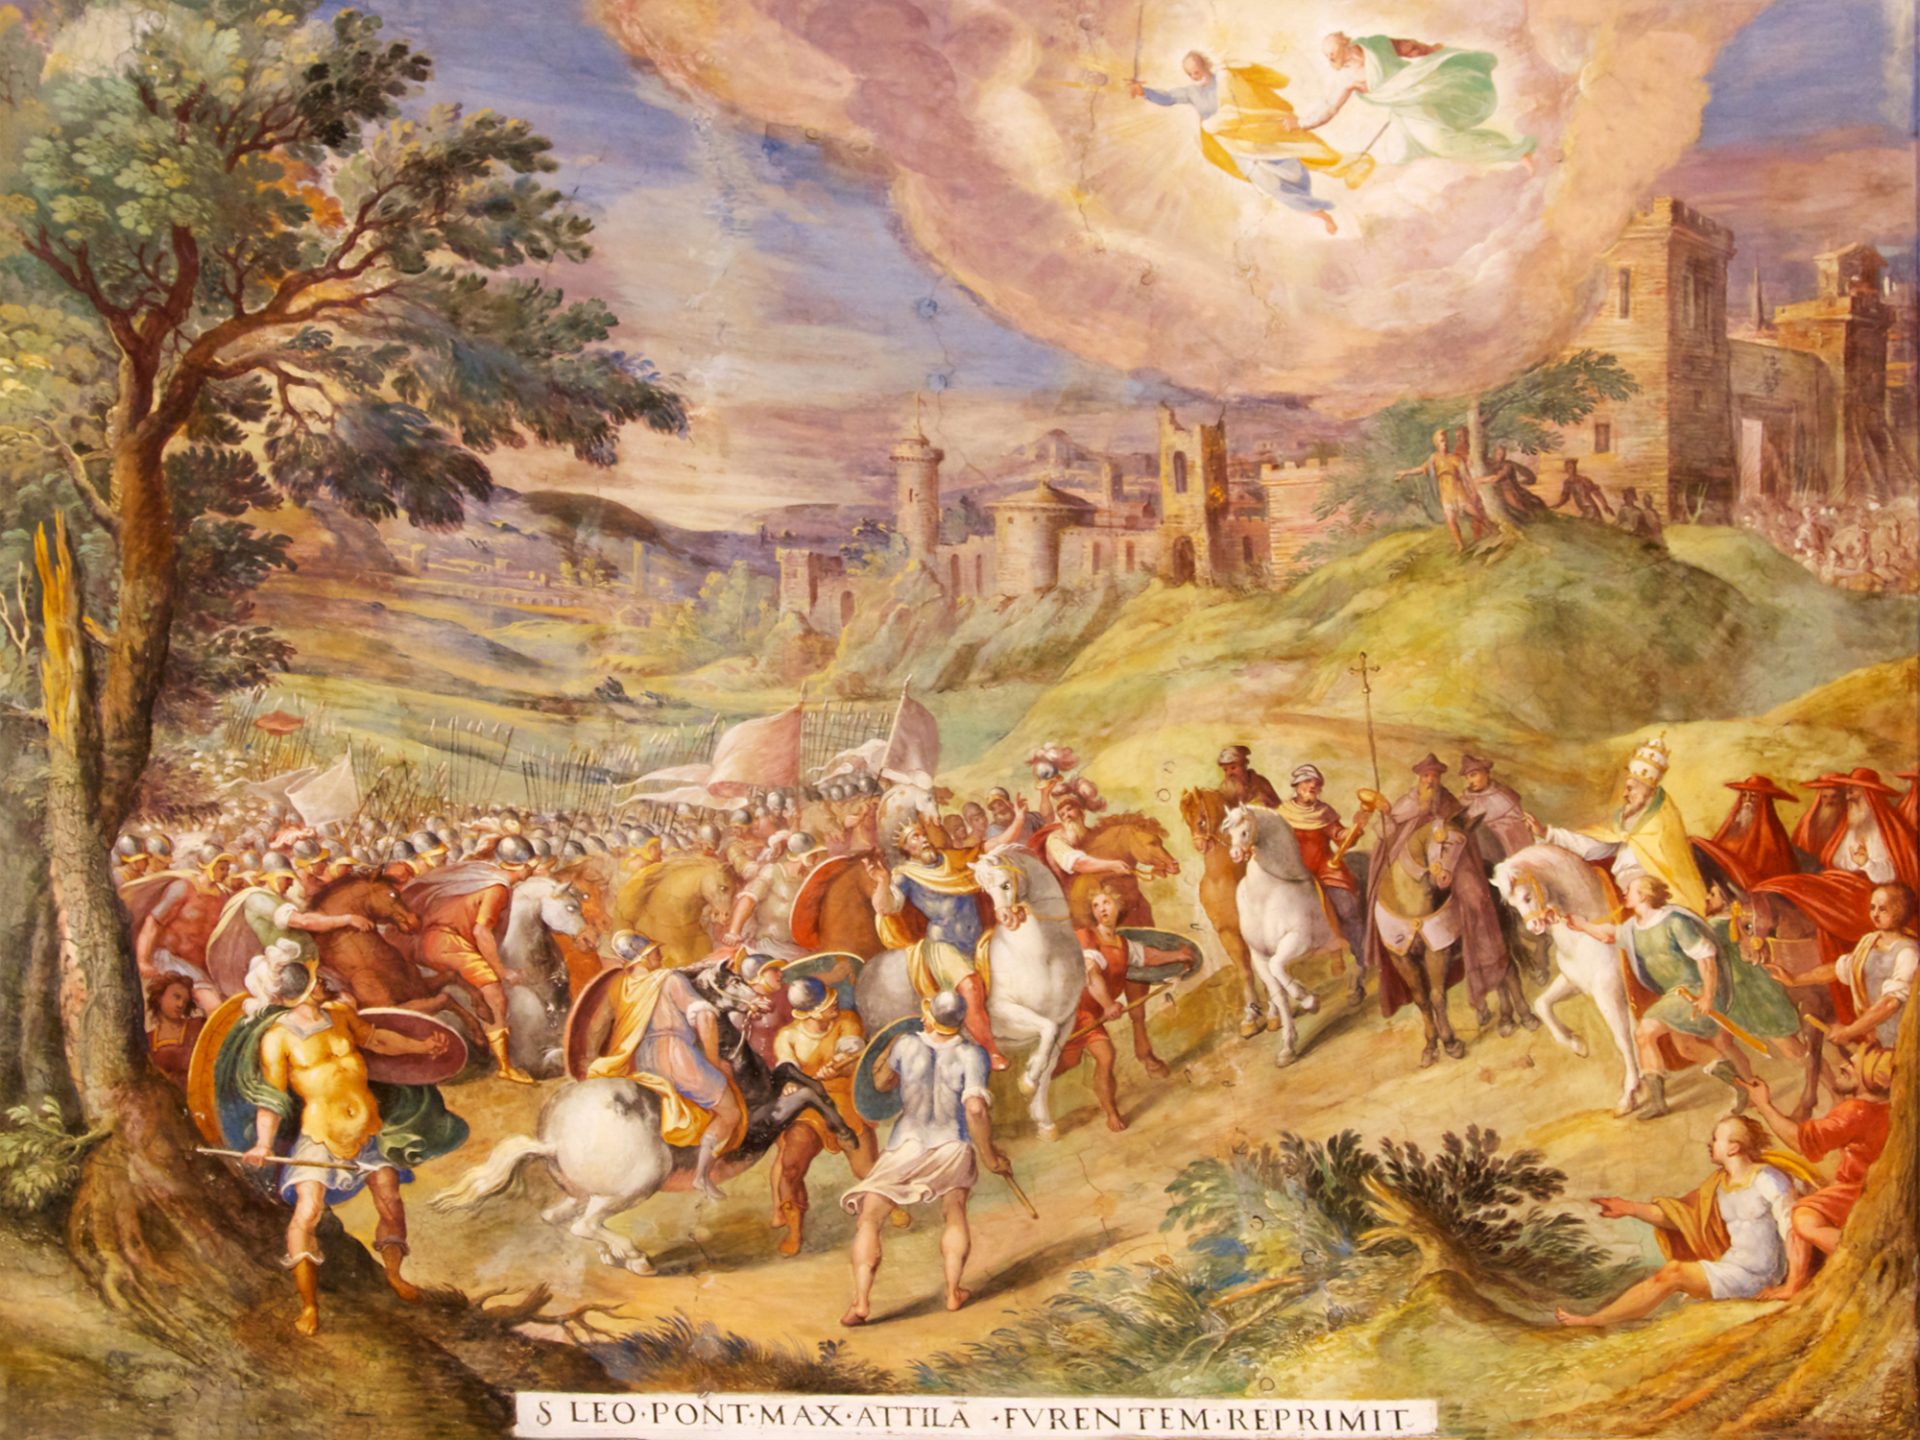 A painting of a historical meeting between Attila the Hun and Pope Leo I in the fifth century. The painting shows Attila on a white horse leading his army of horsemen, who are holding a banner with a bird symbol. Pope Leo I is on a brown horse leading his army of foot soldiers, who are holding a banner with a lion symbol. The two leaders are facing each other in the center of the painting, while their armies are on the sides. The painting has a hilly landscape with a castle in the background, and a cloudy sky with two angels hovering above. The painting is titled “Leo Pont Max Attila Fvrentinum Reprimiit” and is signed by the artist.